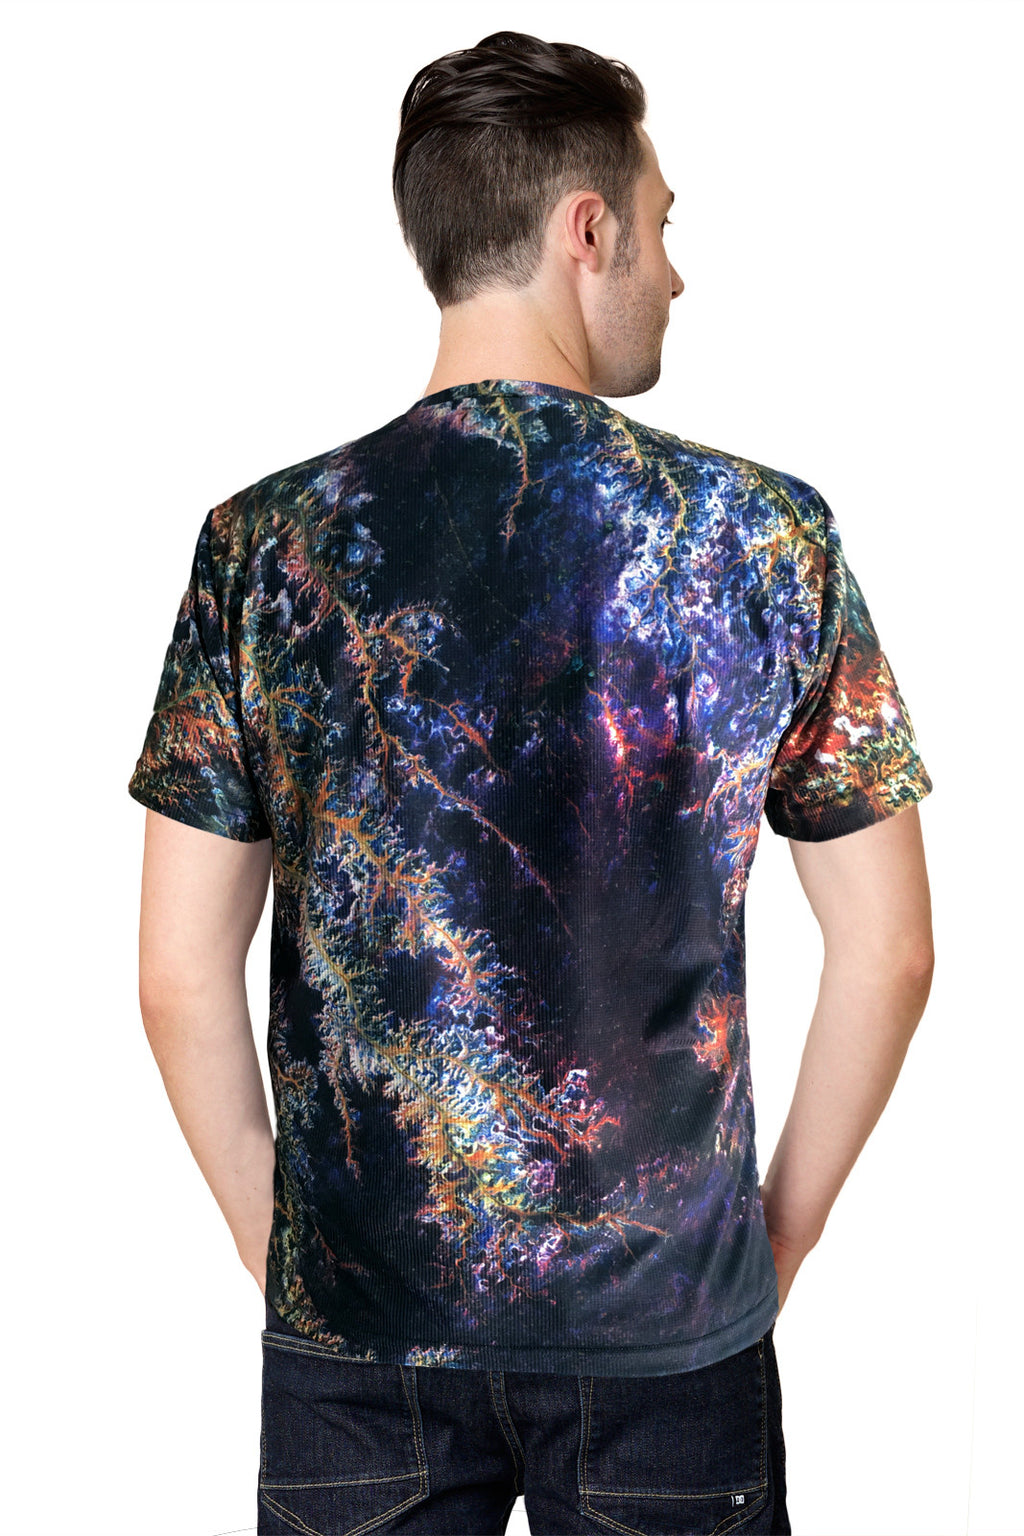 Mens Short Sleeve T-shirt-Printed Image of Earth-Cool Activewear-Ghadamis River-Back View